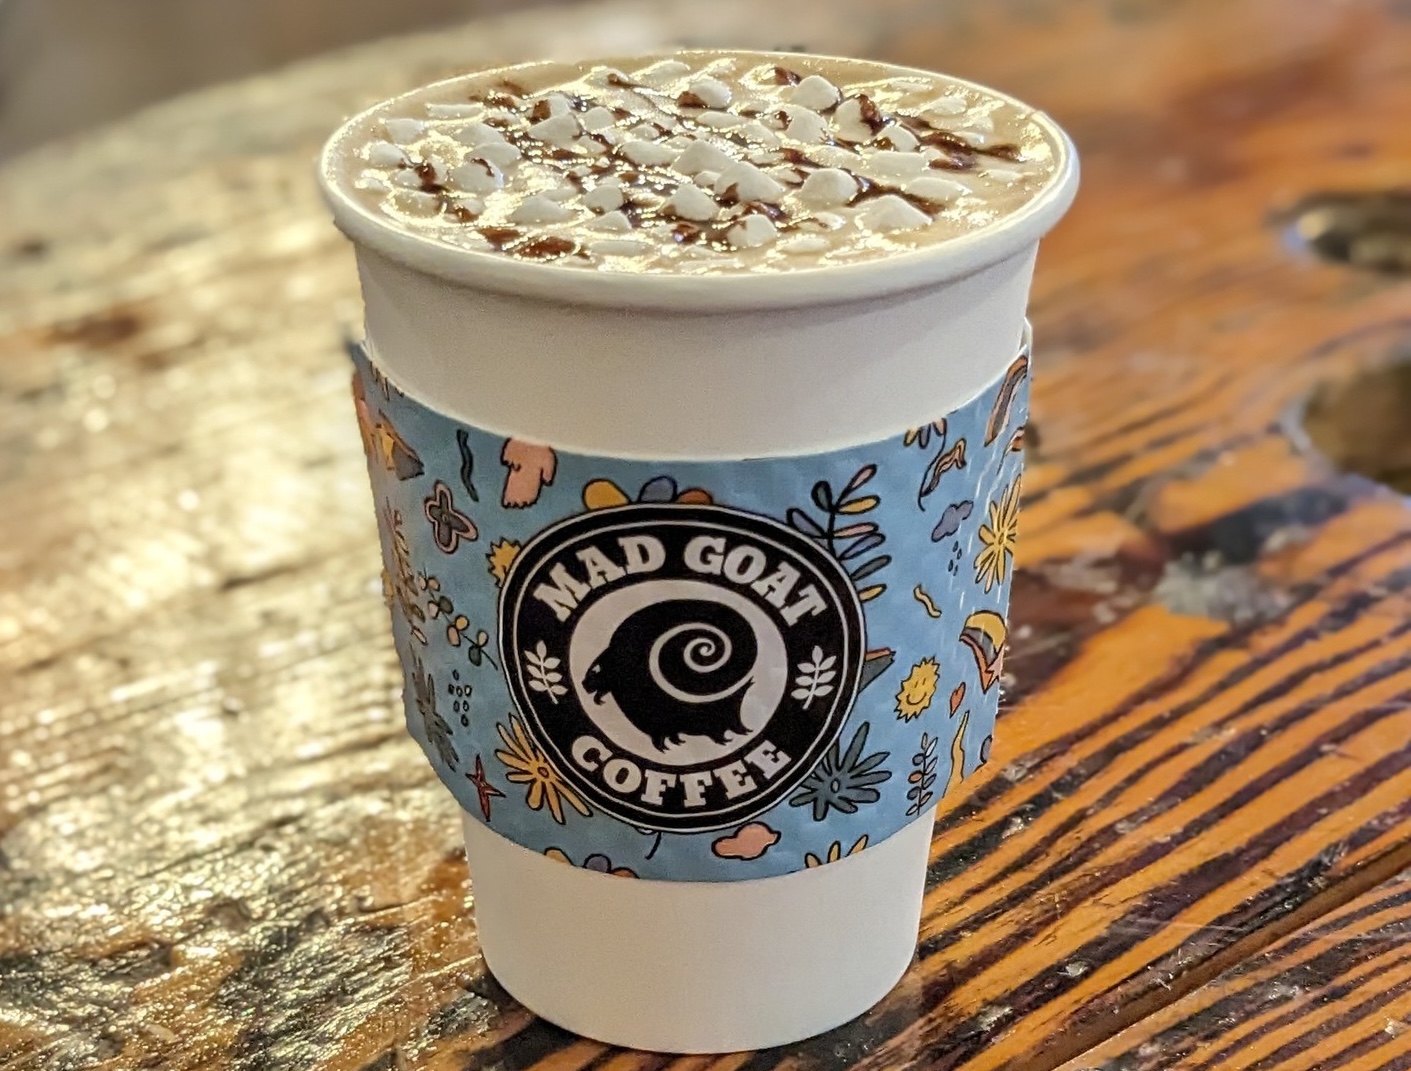 Danville-based Mad Goat Coffee will open in Downtown Champaign